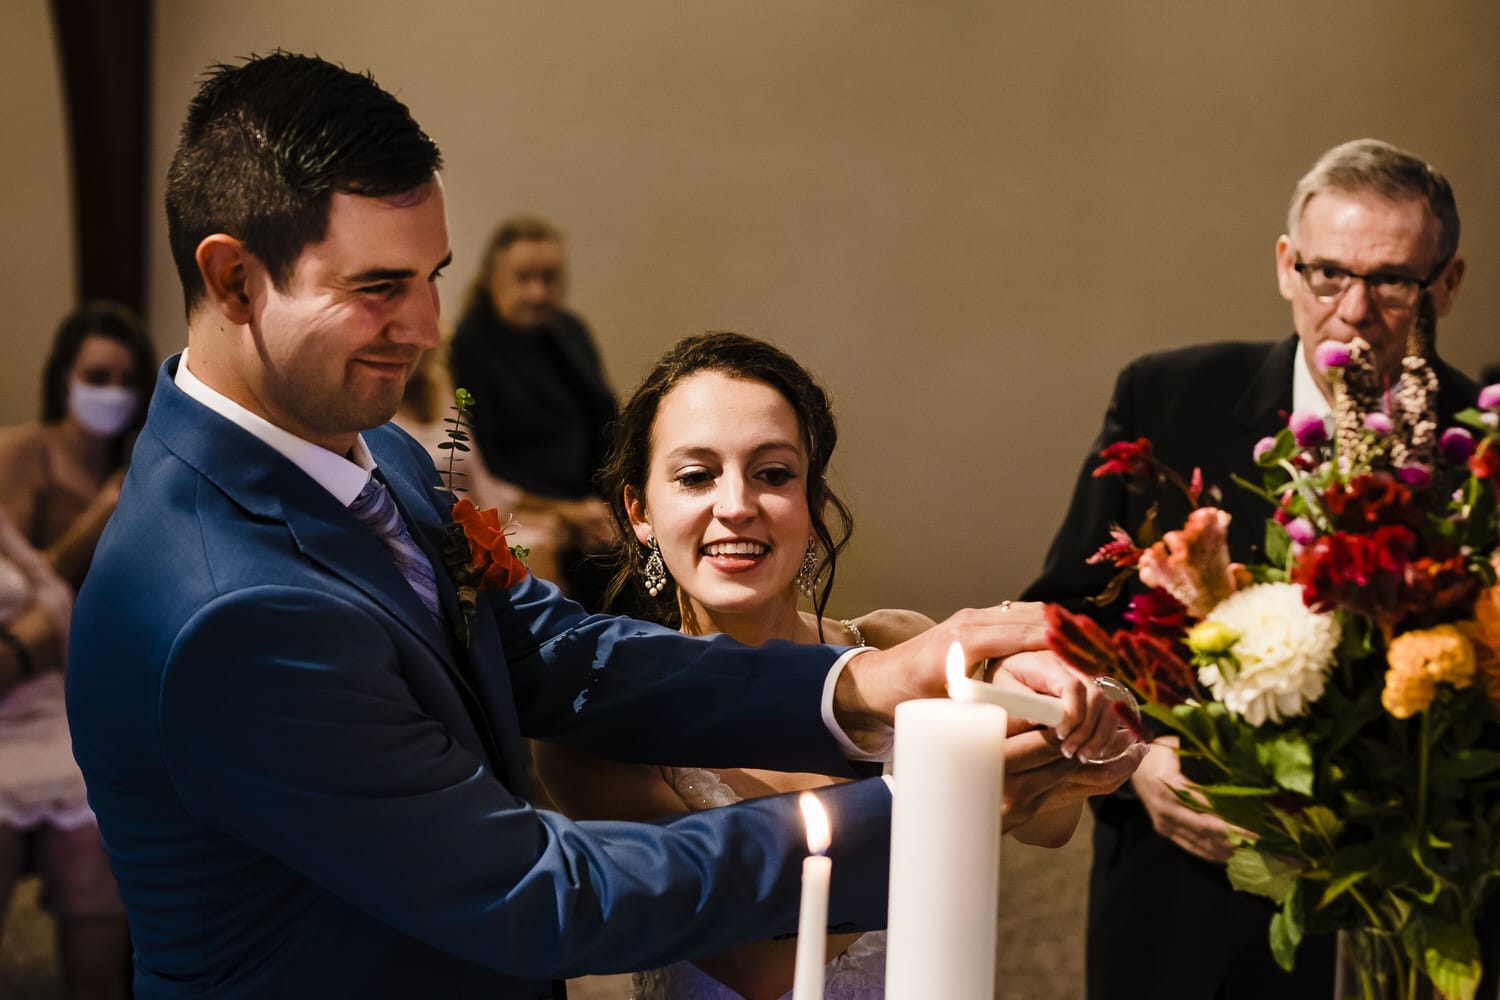 A colorful, candid picture of a bride and groom lighting a unity candle during their intimate wedding ceremony. 